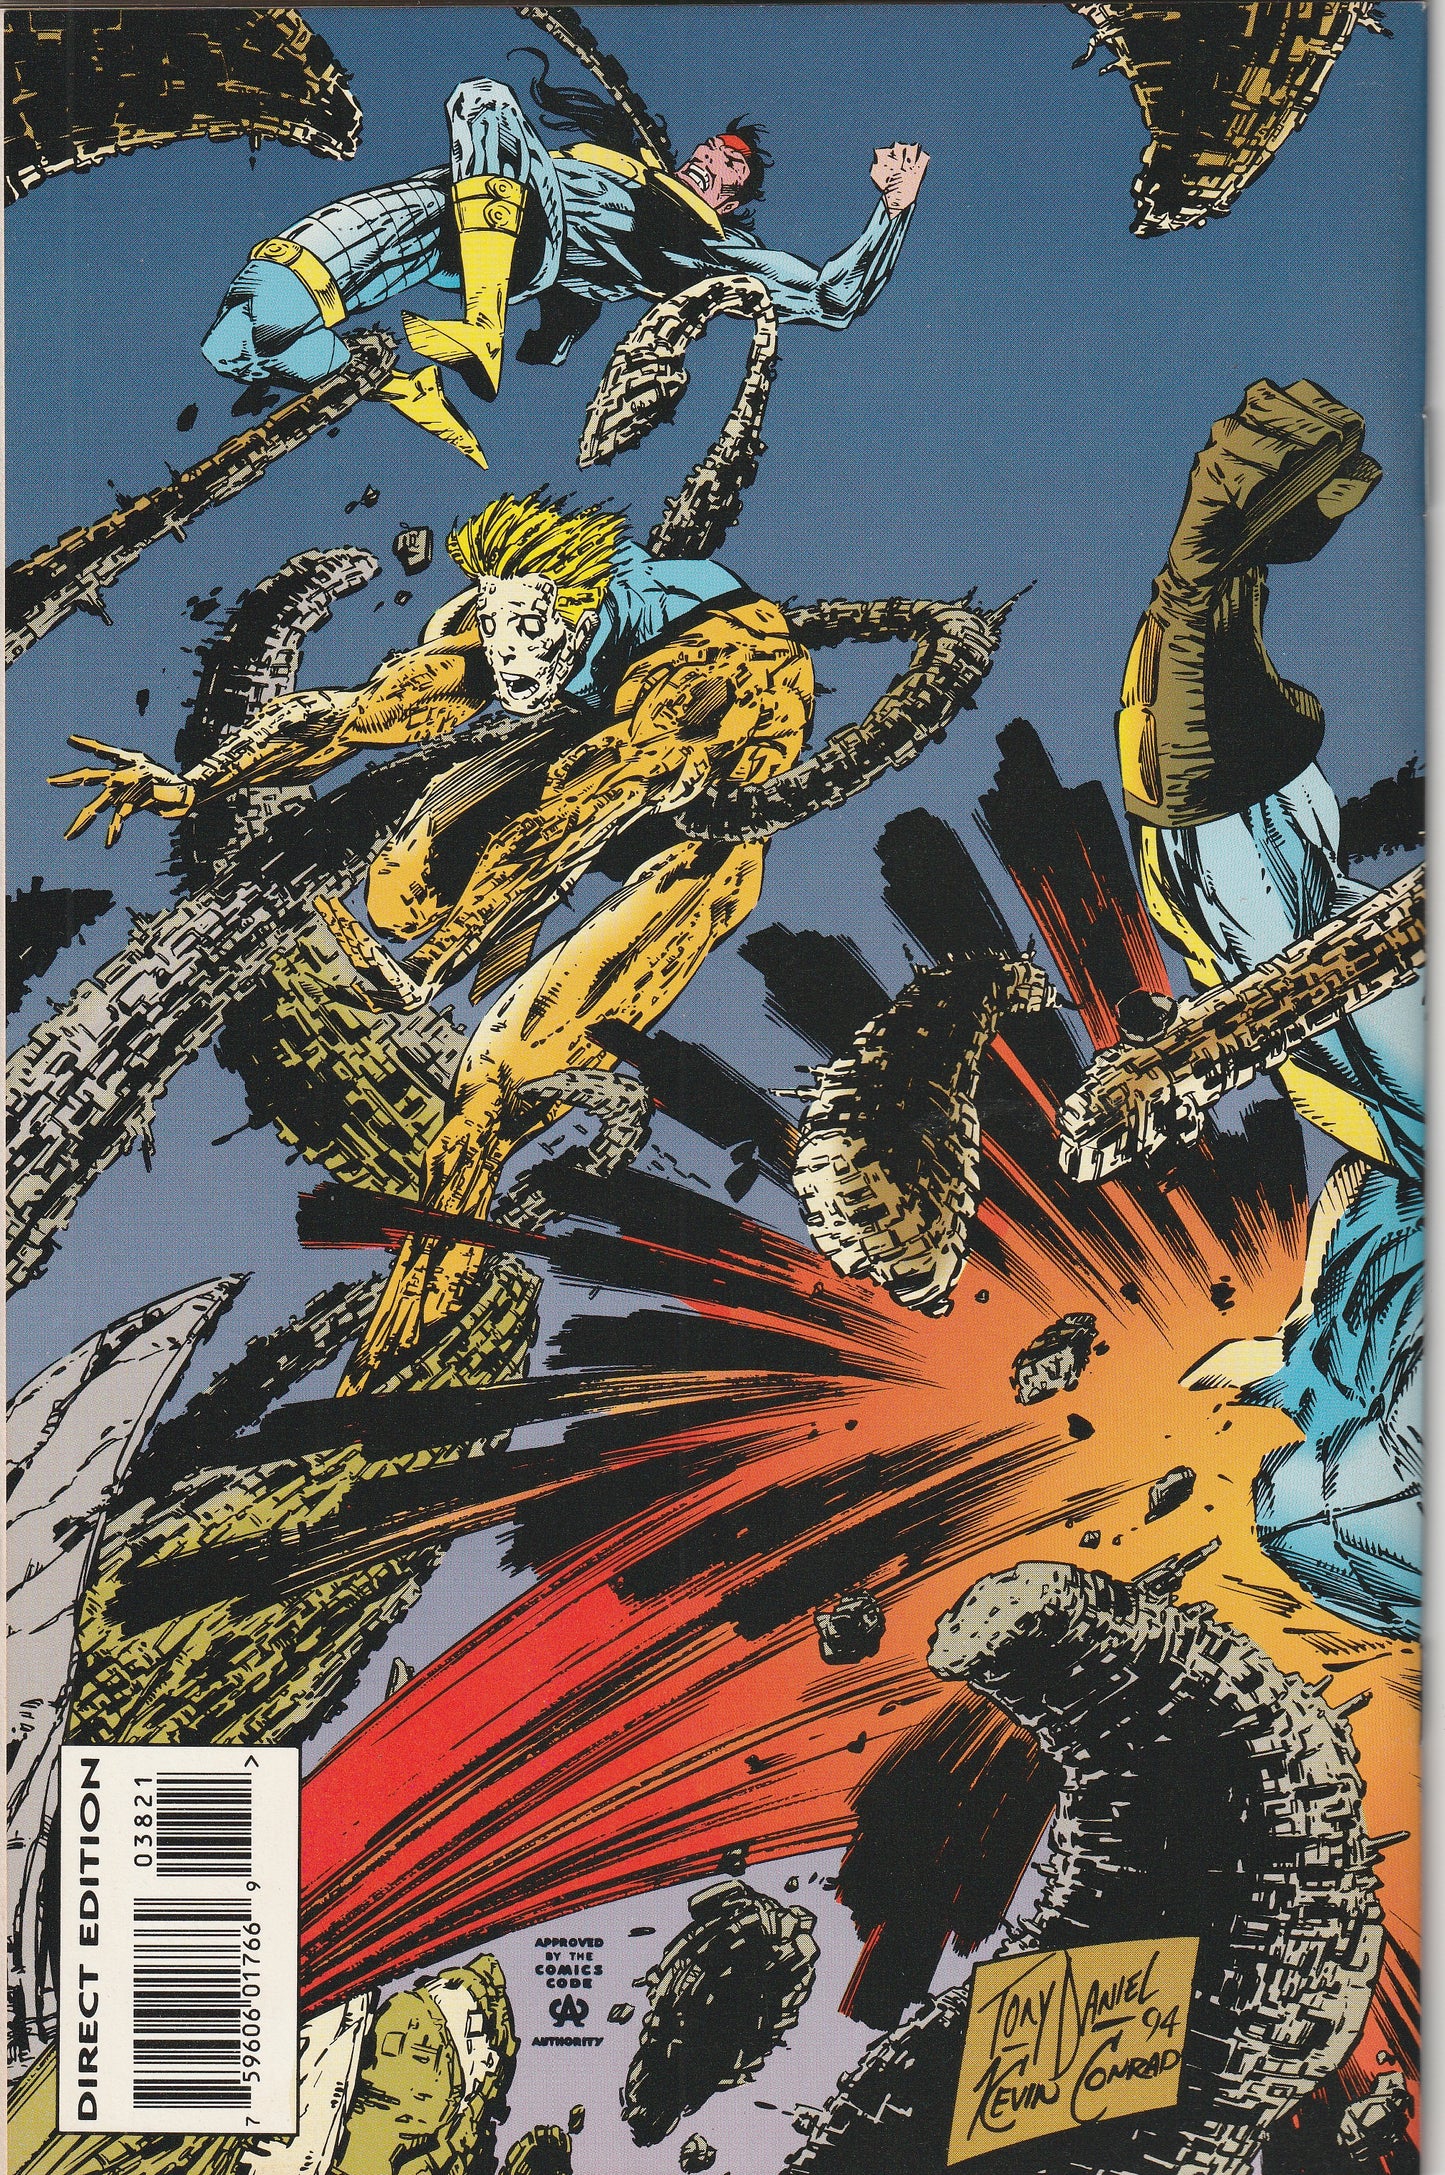 X-Force #38 (1994) - Phalanx Covenant - Foil stamped edition